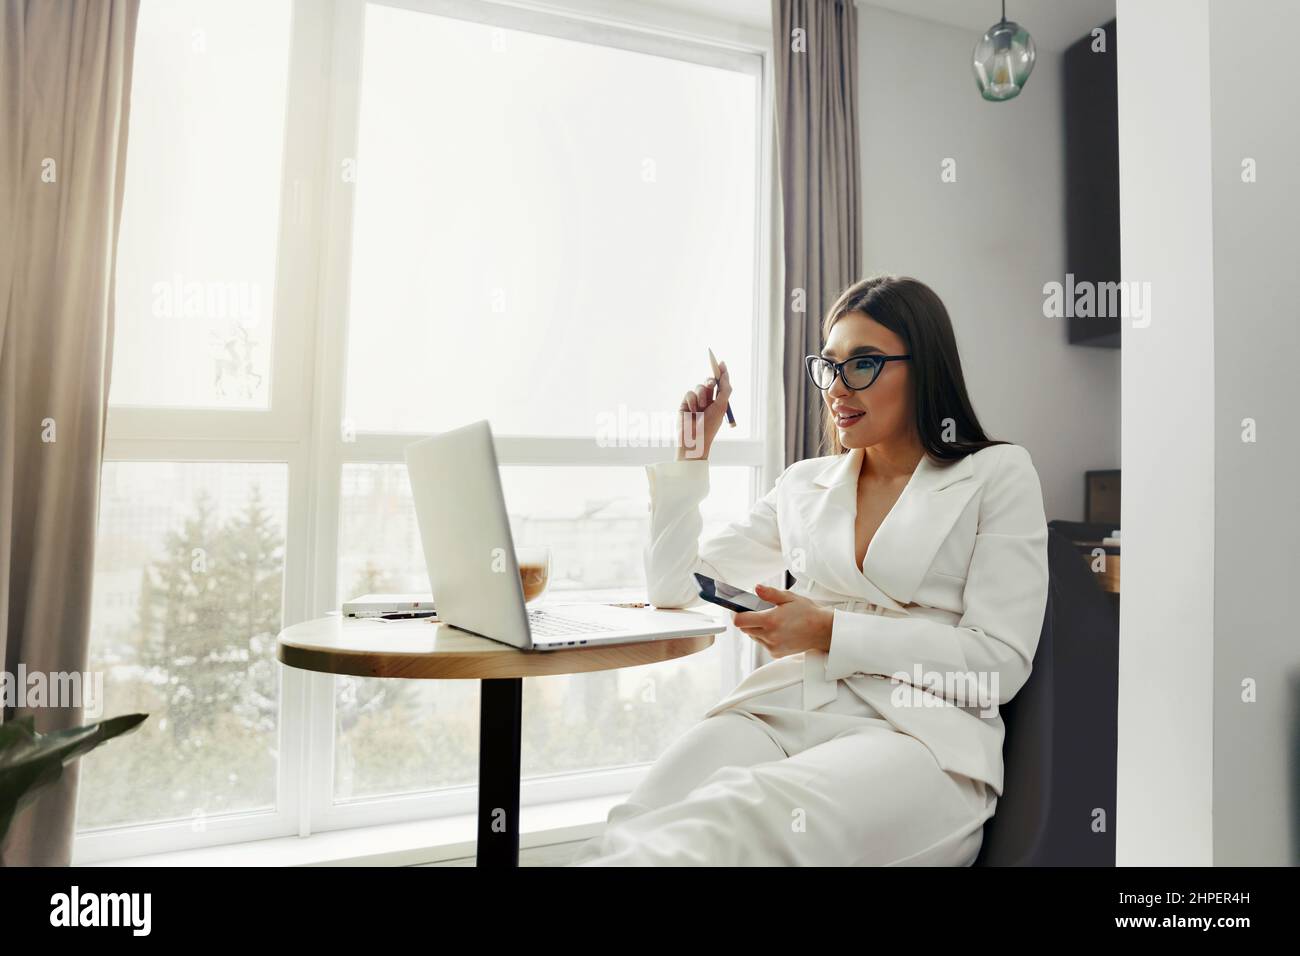 Beautiful happy woman using mobile phone while working at home with laptop. Smiling woman wearing eyeglasses messaging with smartphone. Stock Photo